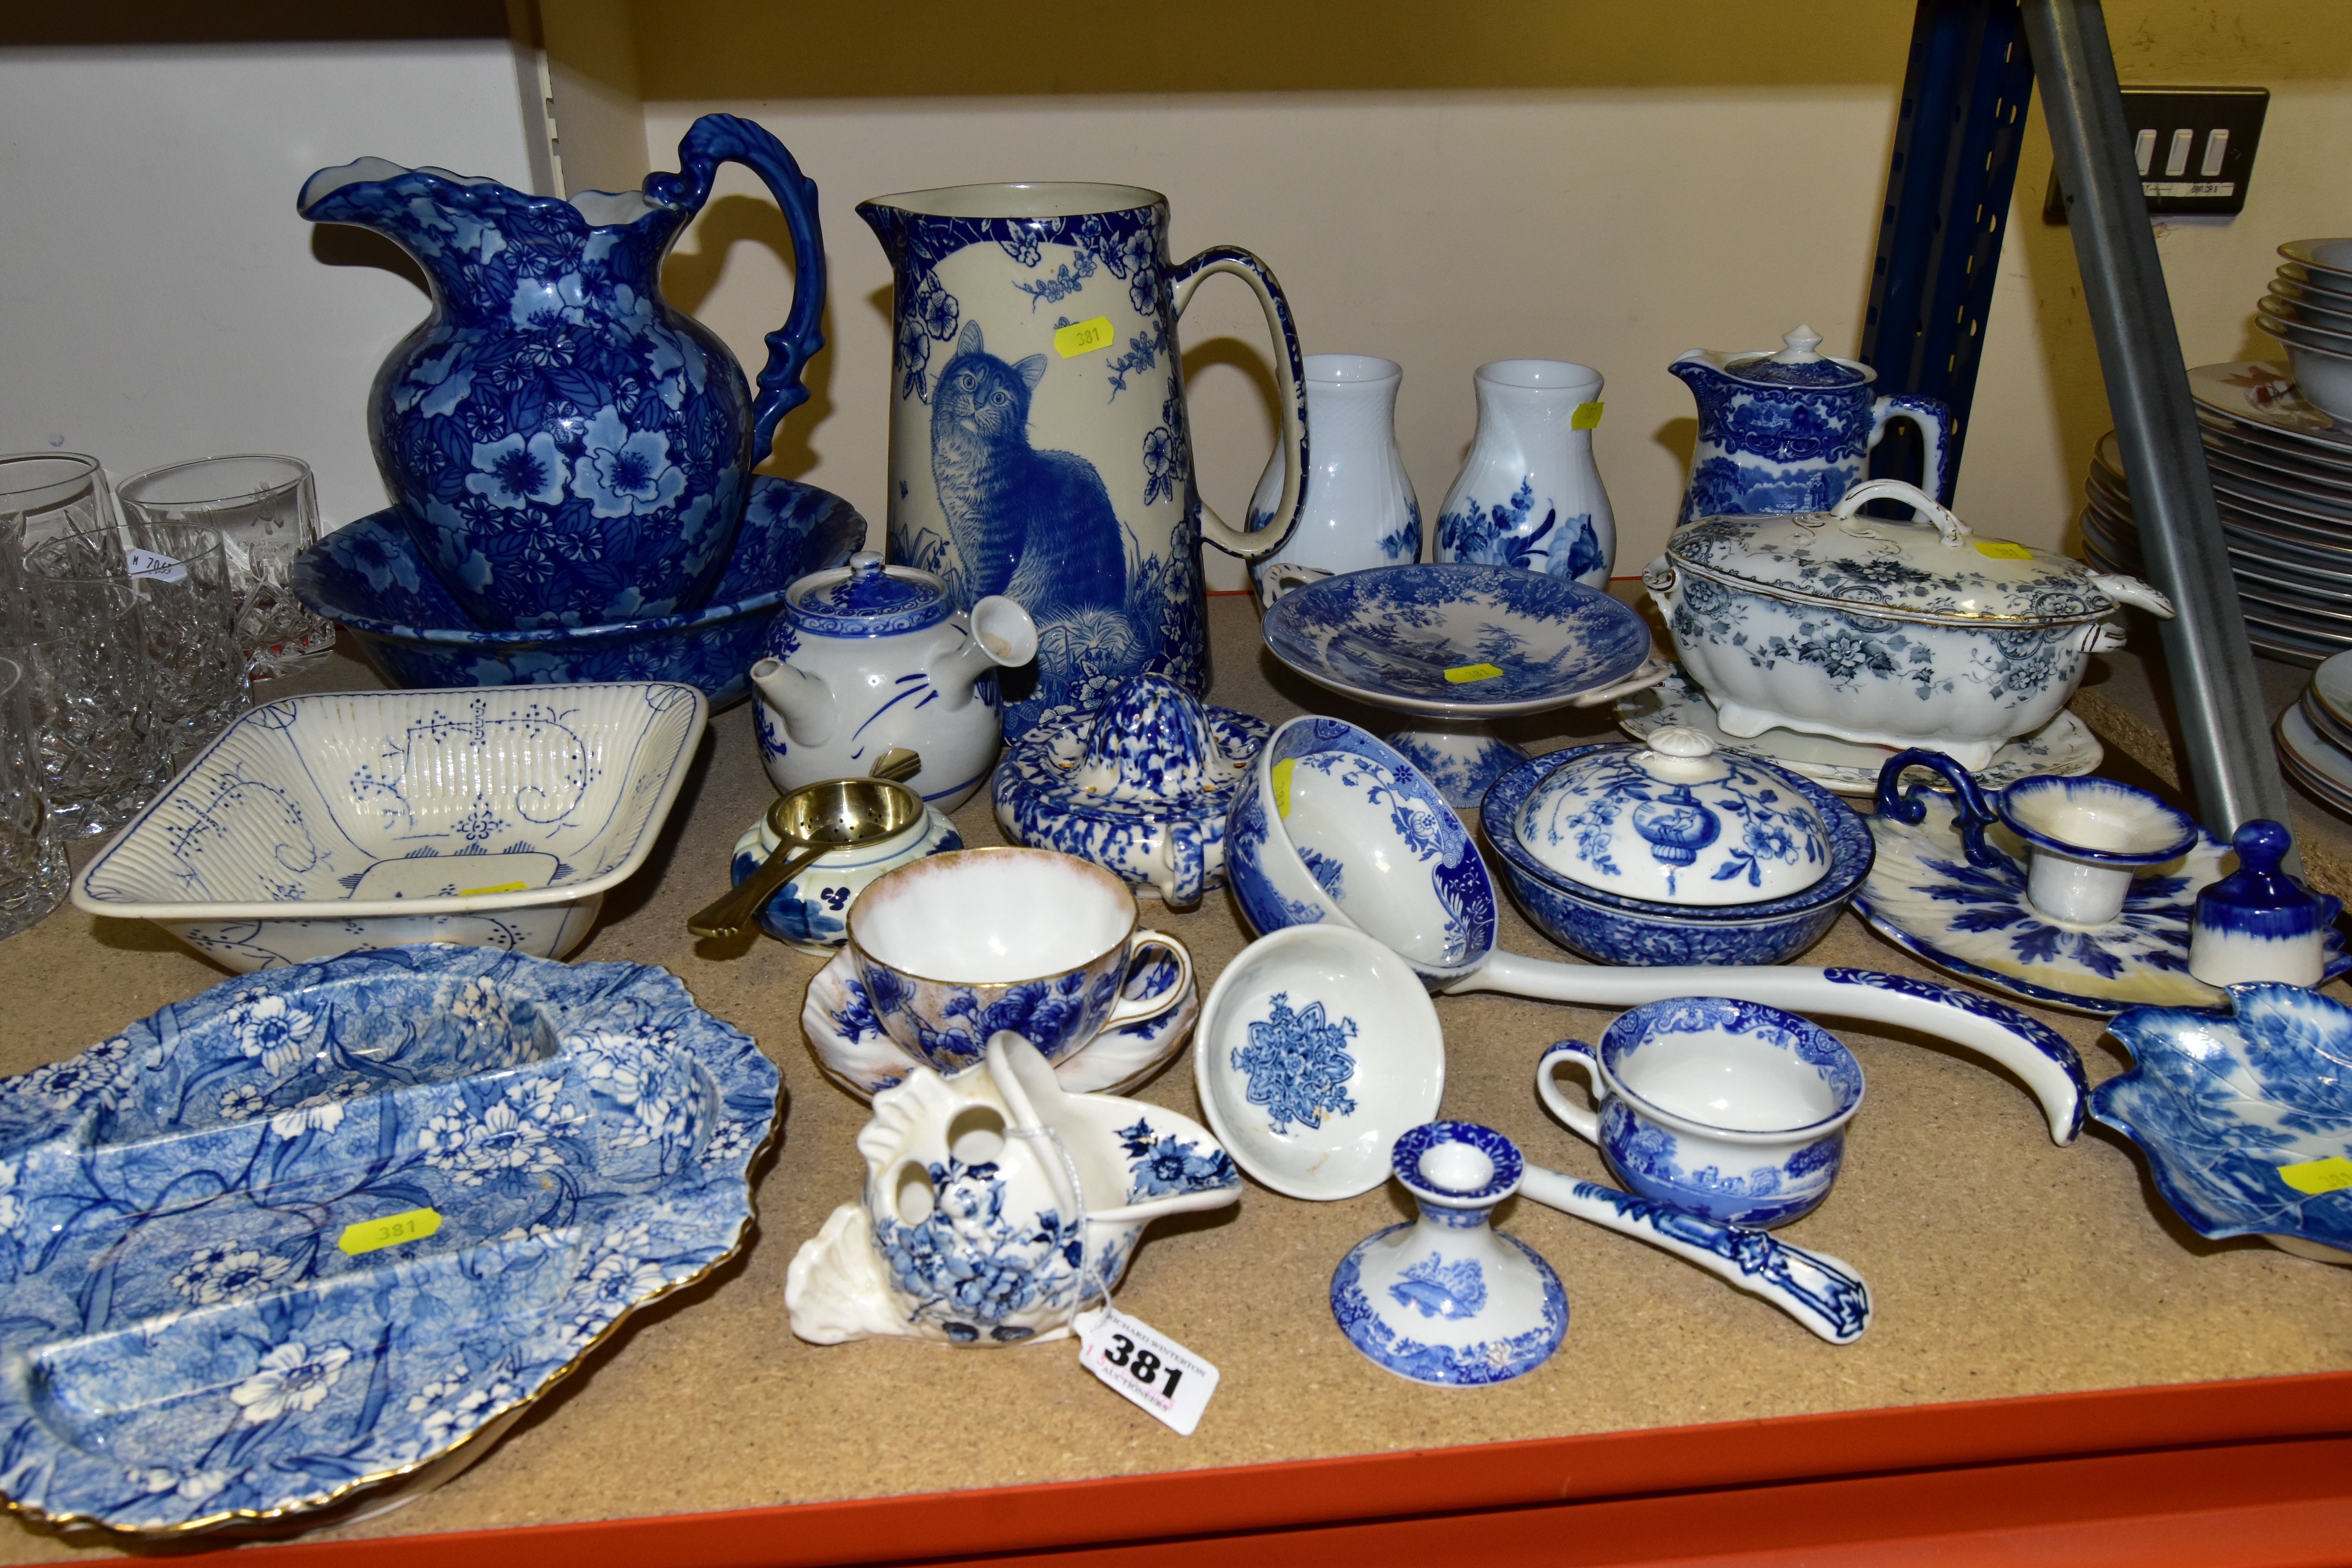 A COLLECTION OF BLUE AND WHITE CERAMICS, comprising a Staffordshire ironstone candle holder, a